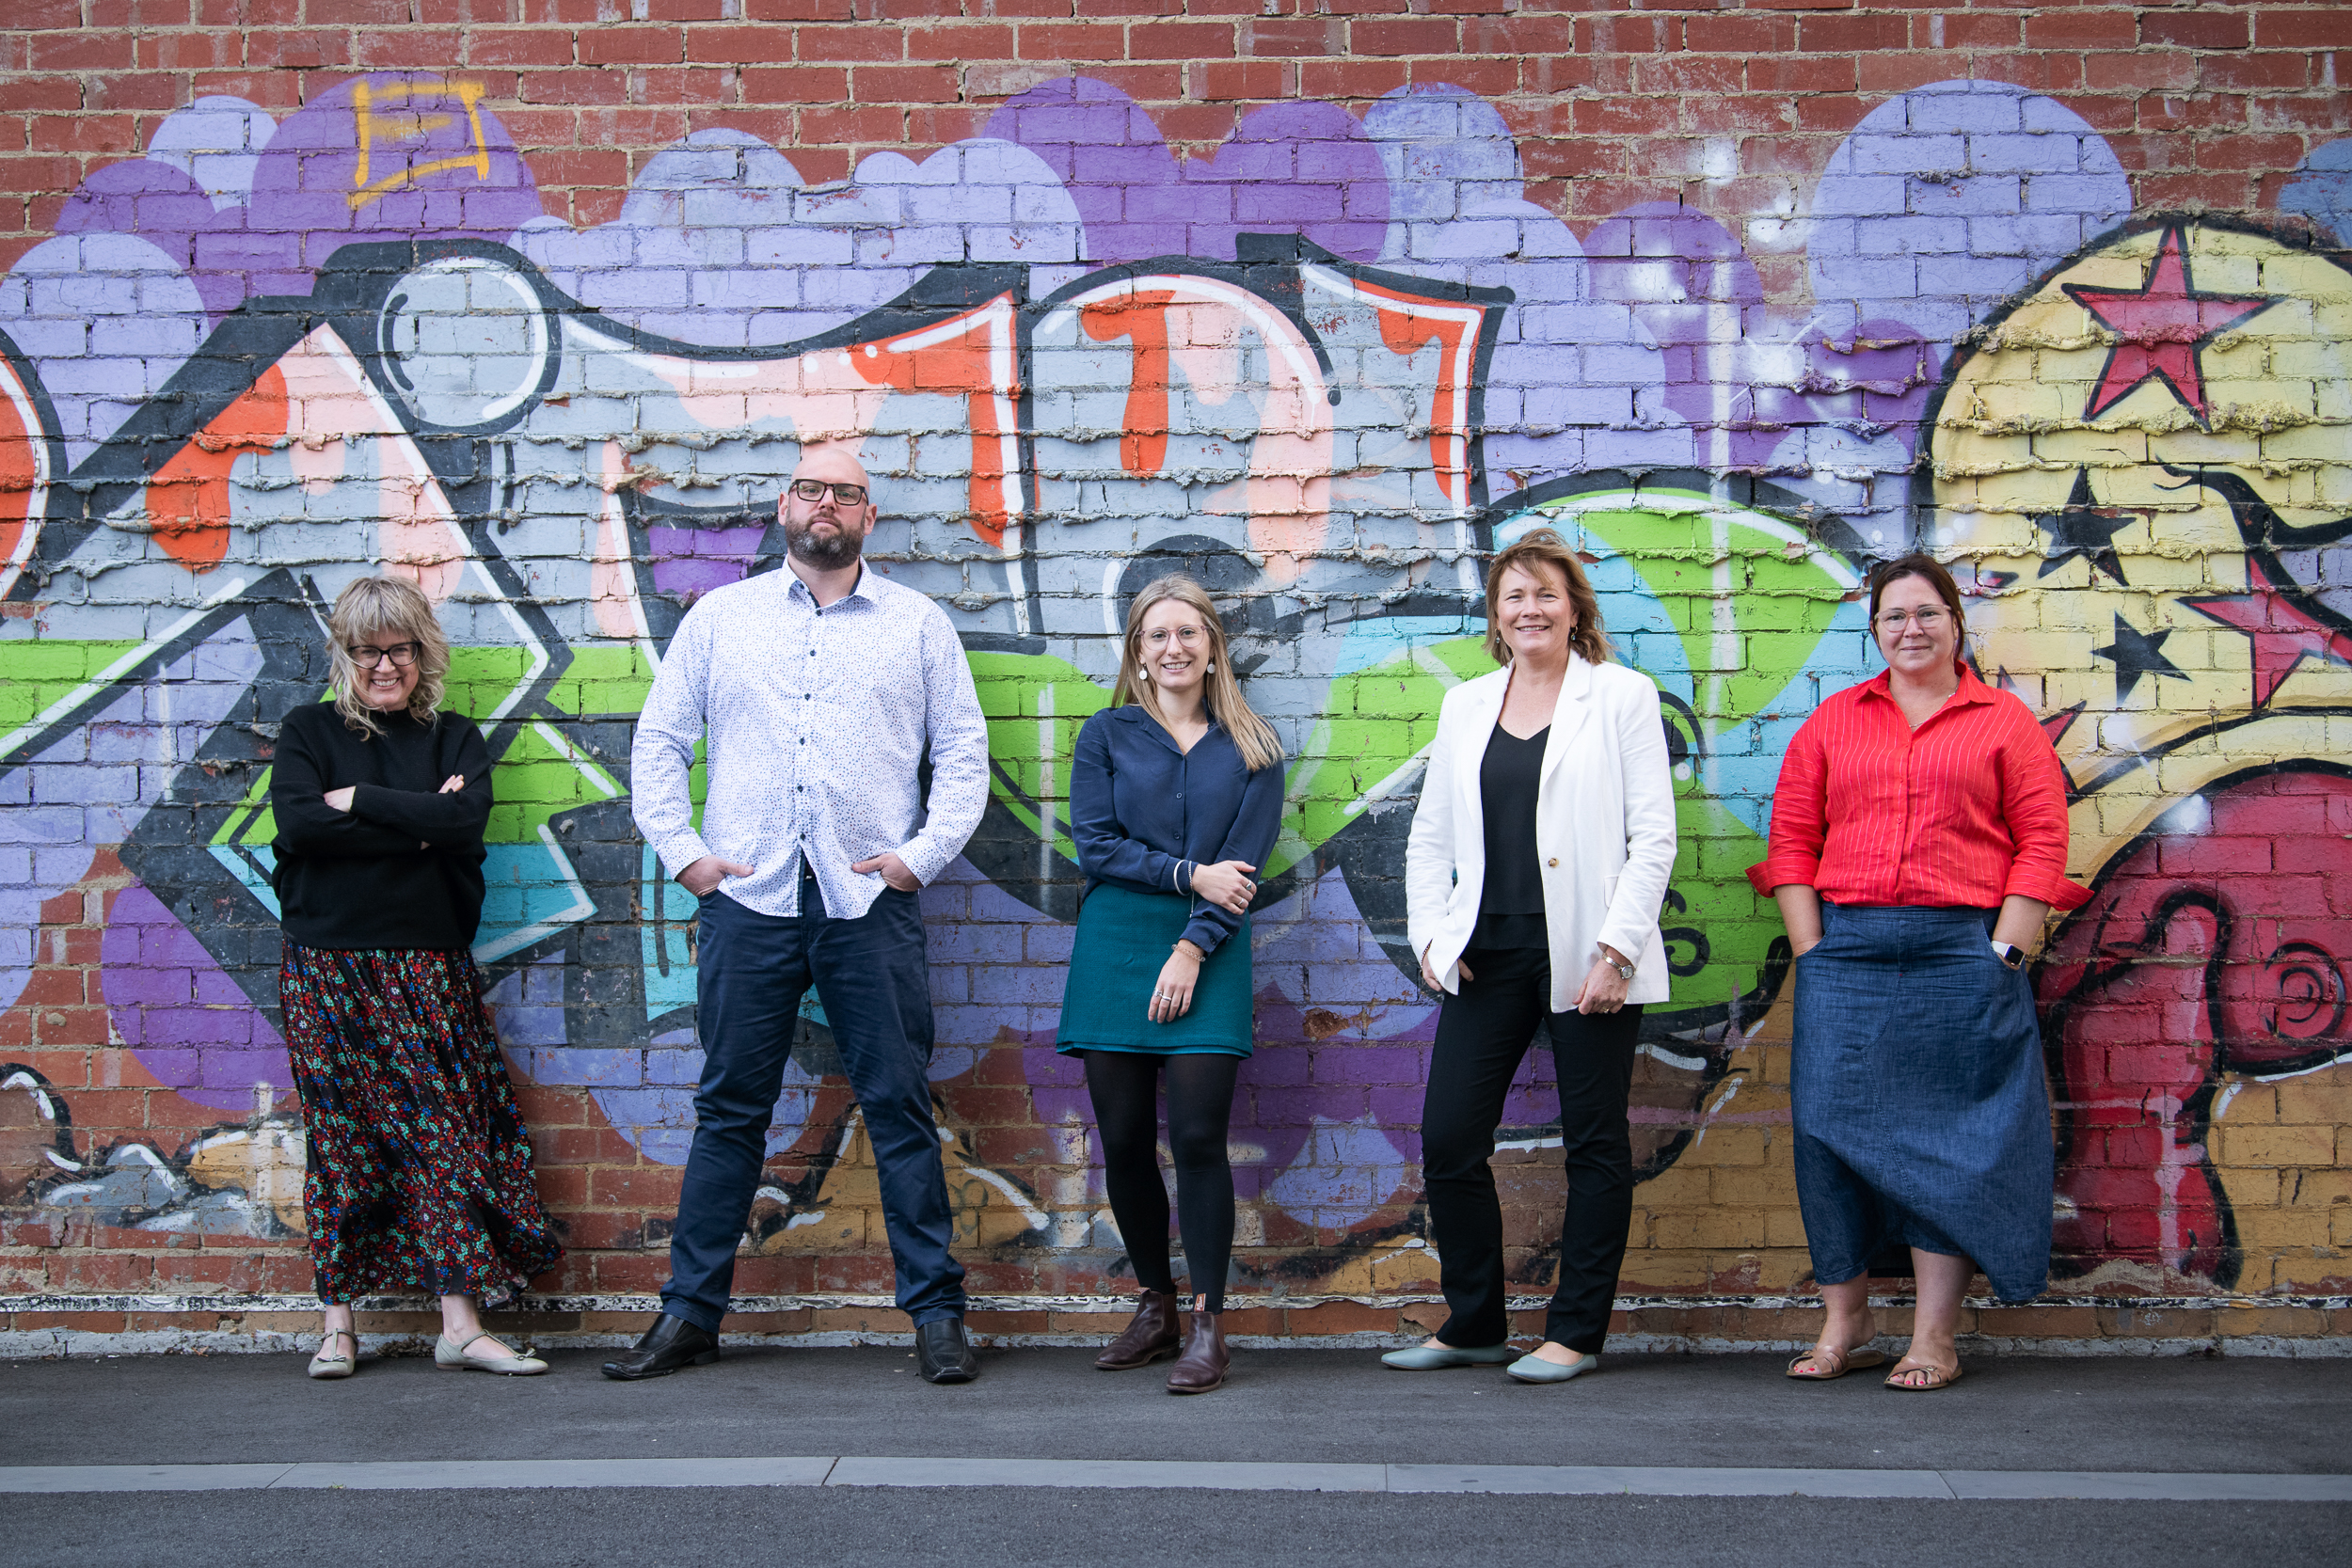 Melbourne team and staff photography. Personal branding group portraits of team collaborating and working together. This image shows a group portrait of 5 people standing in front of a graffiti wall.